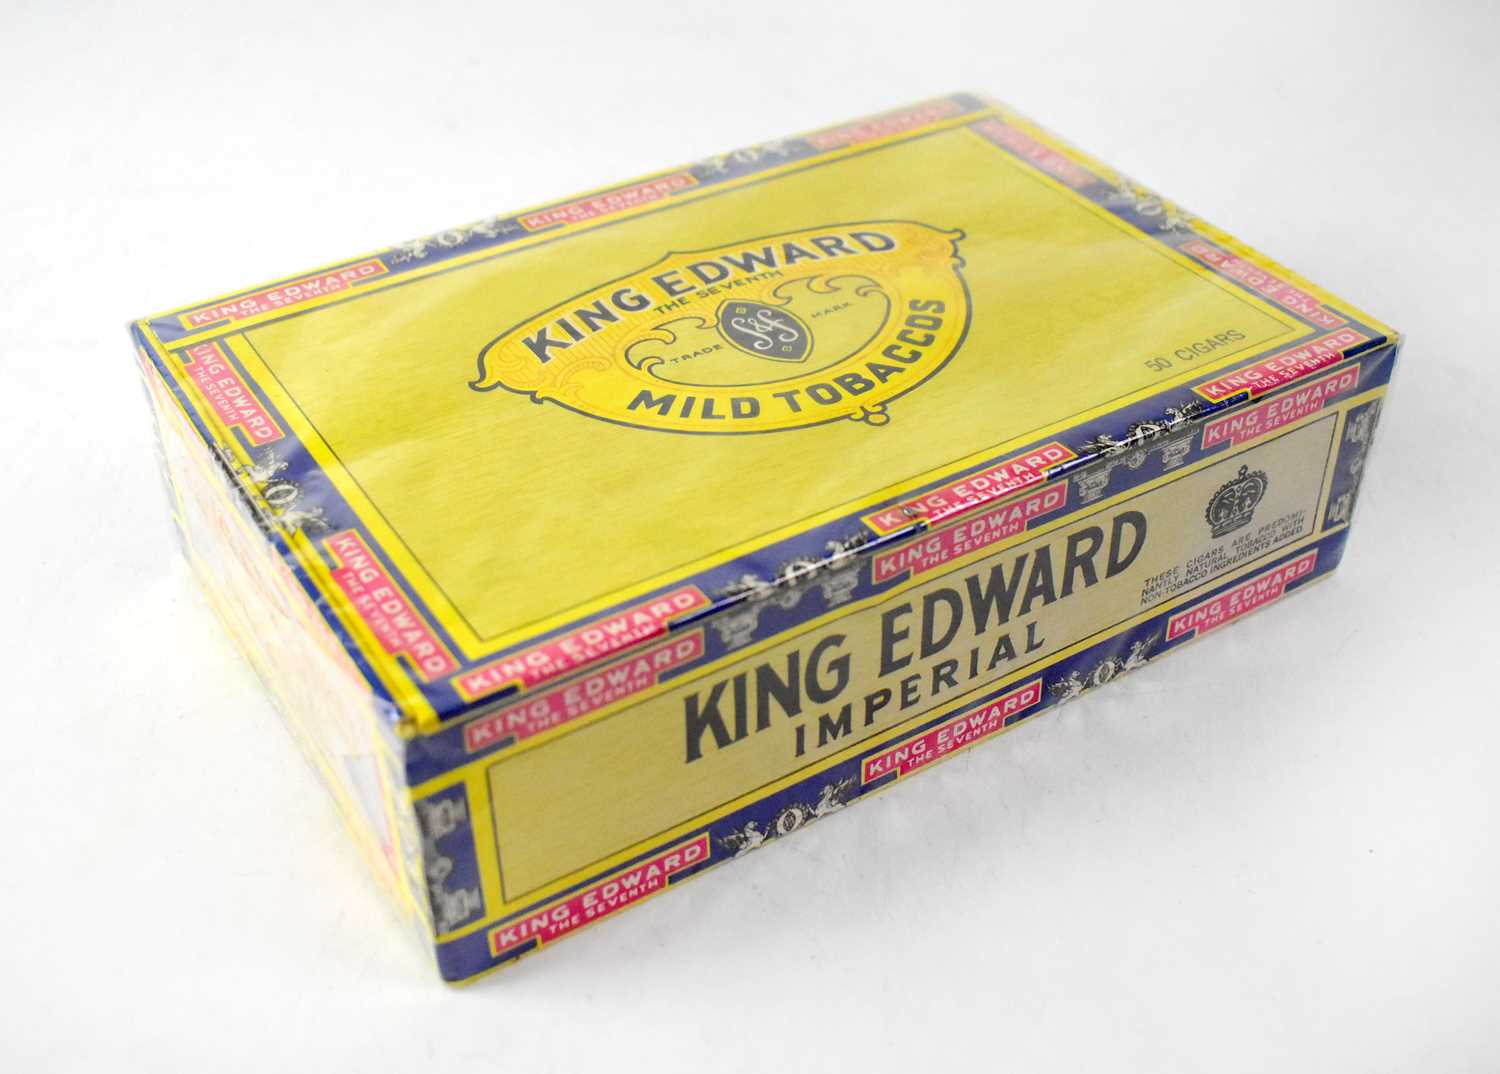 A sealed box of fifty King Edward VII Imperial Mild Tobacco cigars.